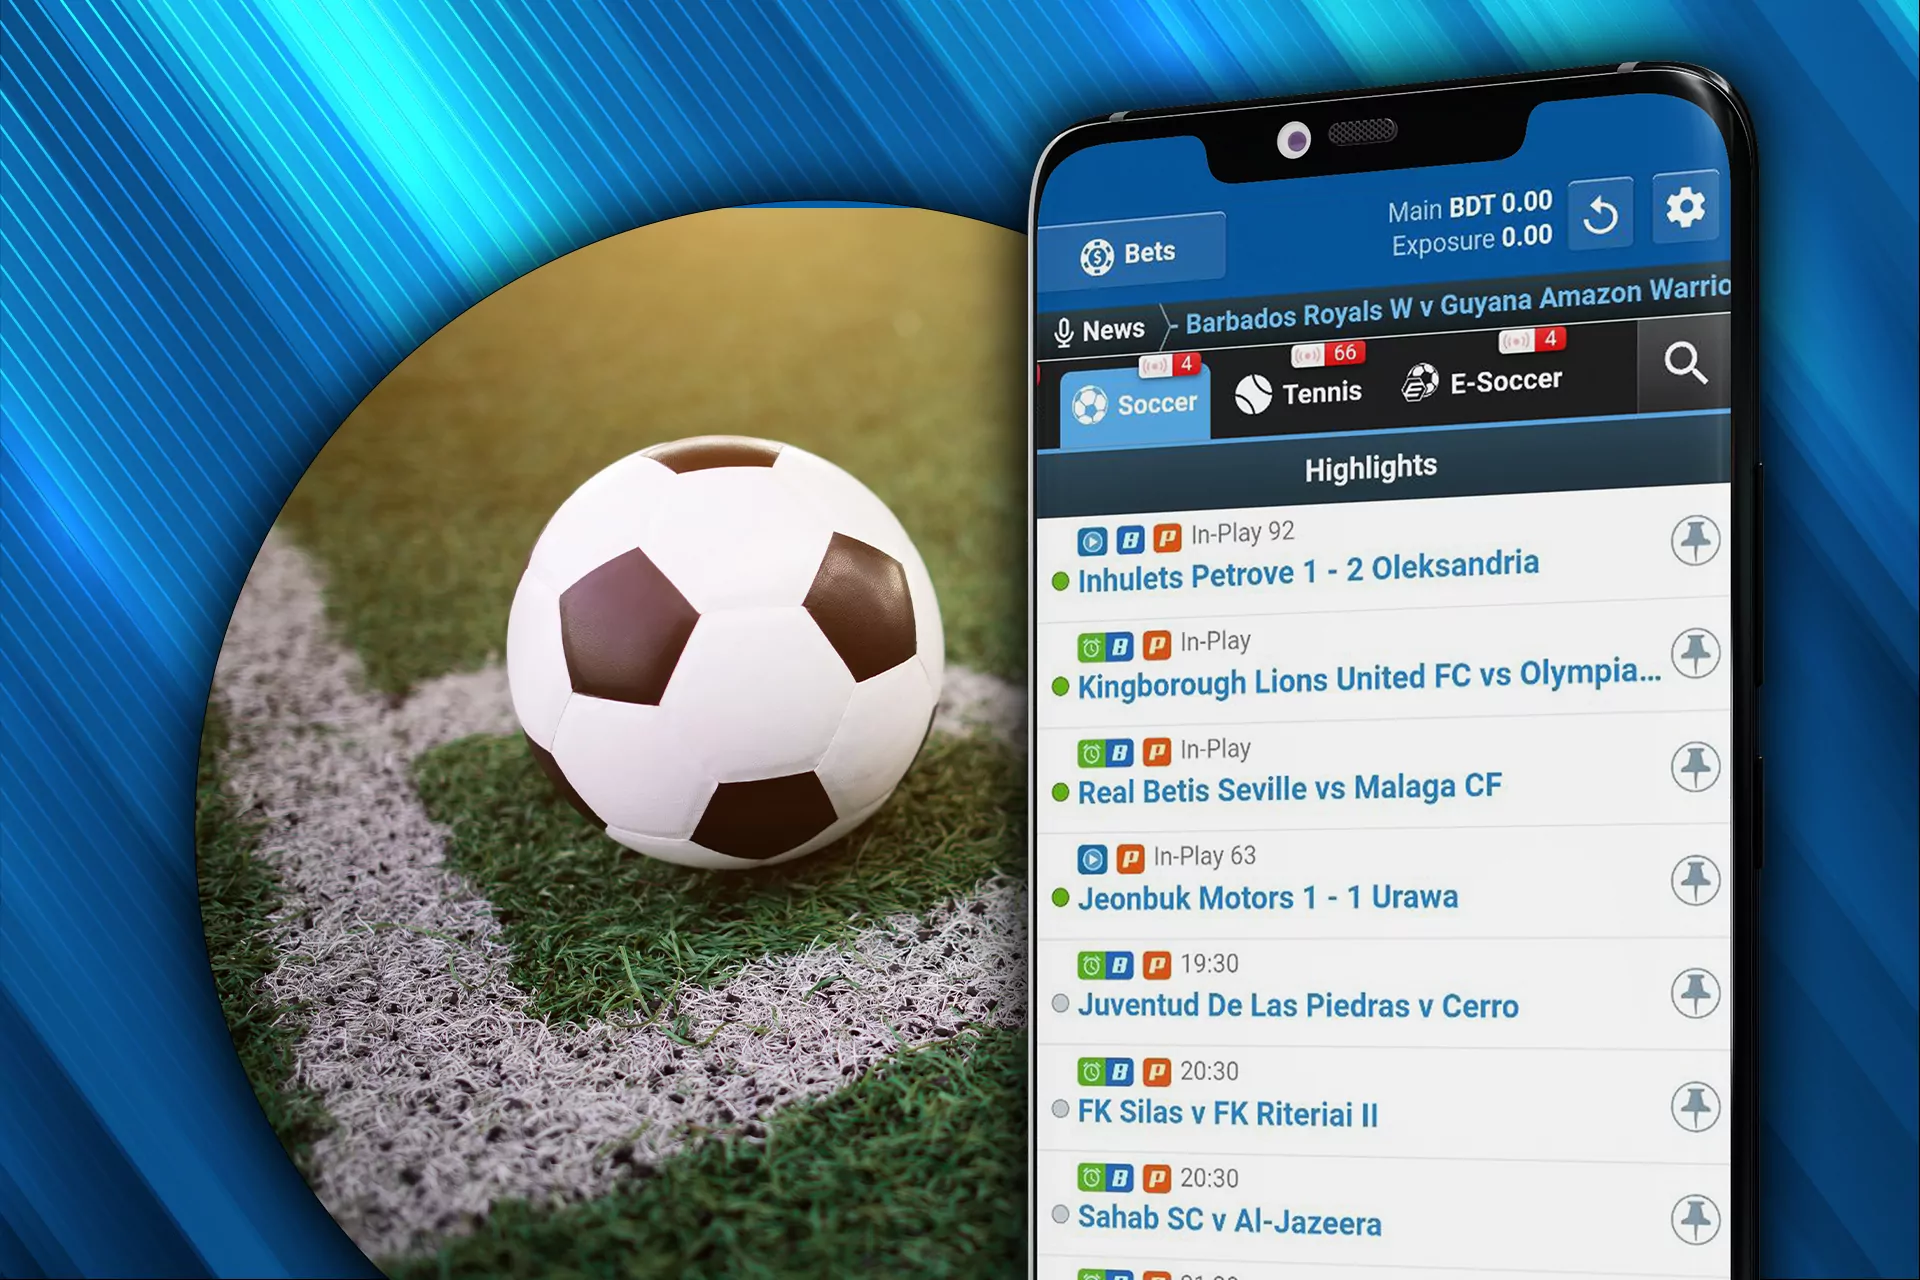 Football leagues are available for betting via the app.